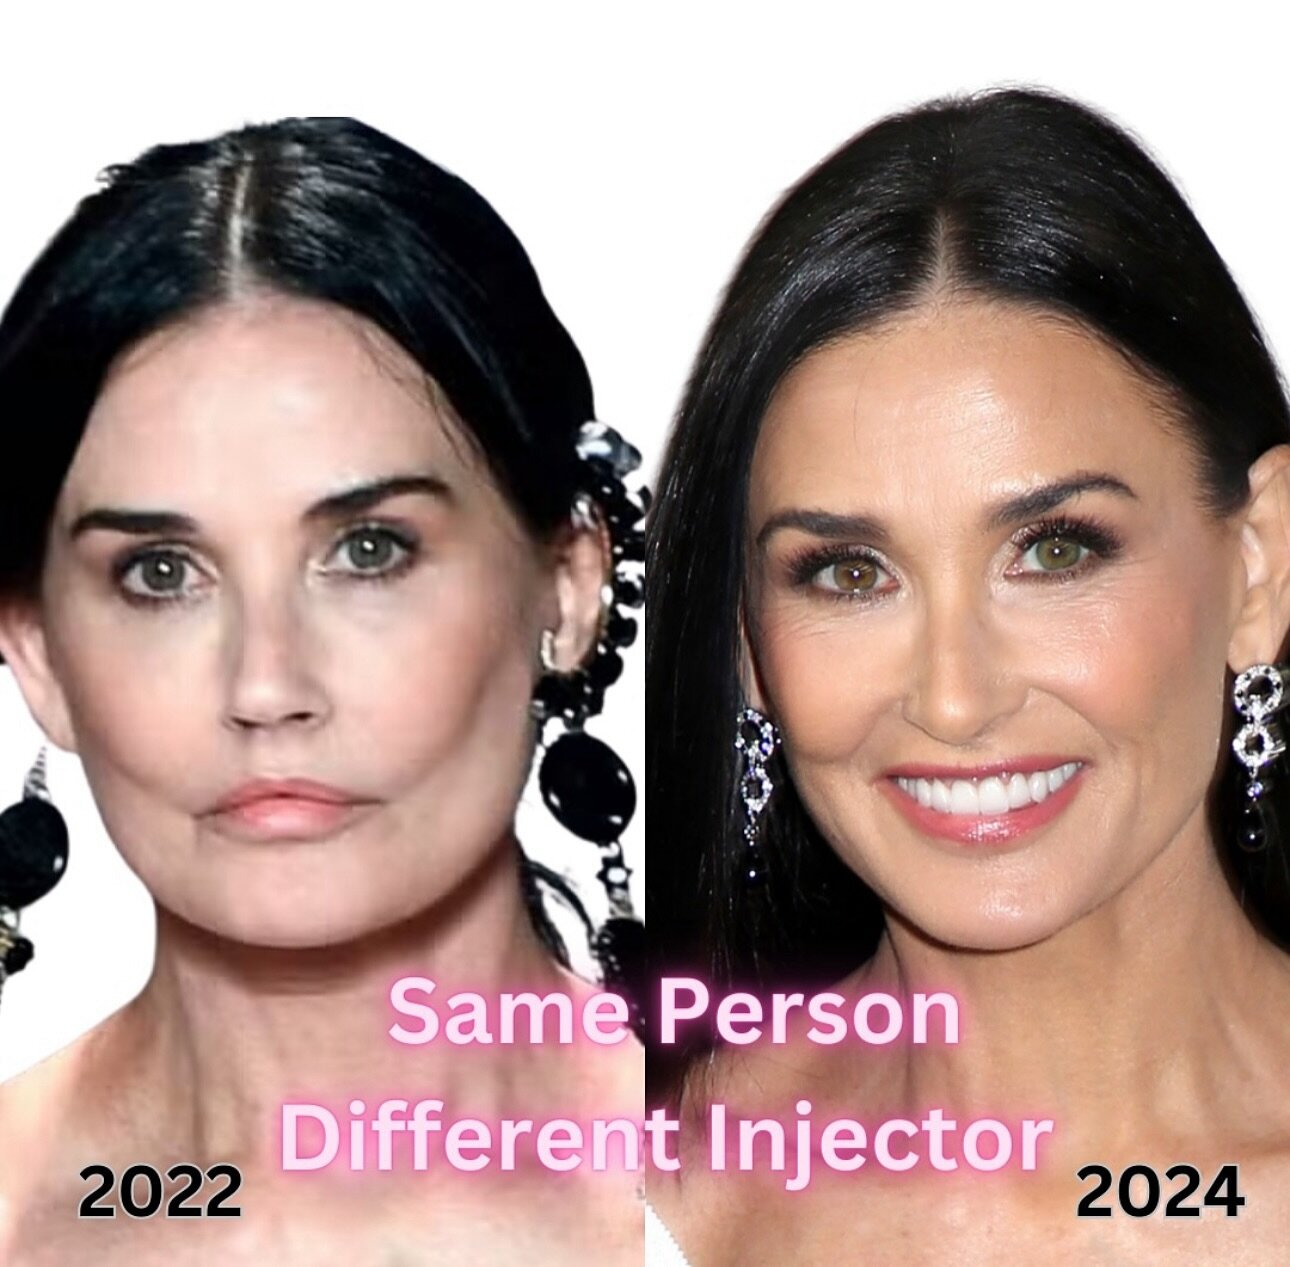 Same PERSON | Different INJECTORS! 💉👄 This is the importance of having an injector that tell you the truth and won&rsquo;t overdo it!

Services we offer:
▪️ Fillers
▪️ Anti-aging treatments
▪️ Facial Balancing
▪️ Laser Hair Removal
▪️ Skin Rejuvena